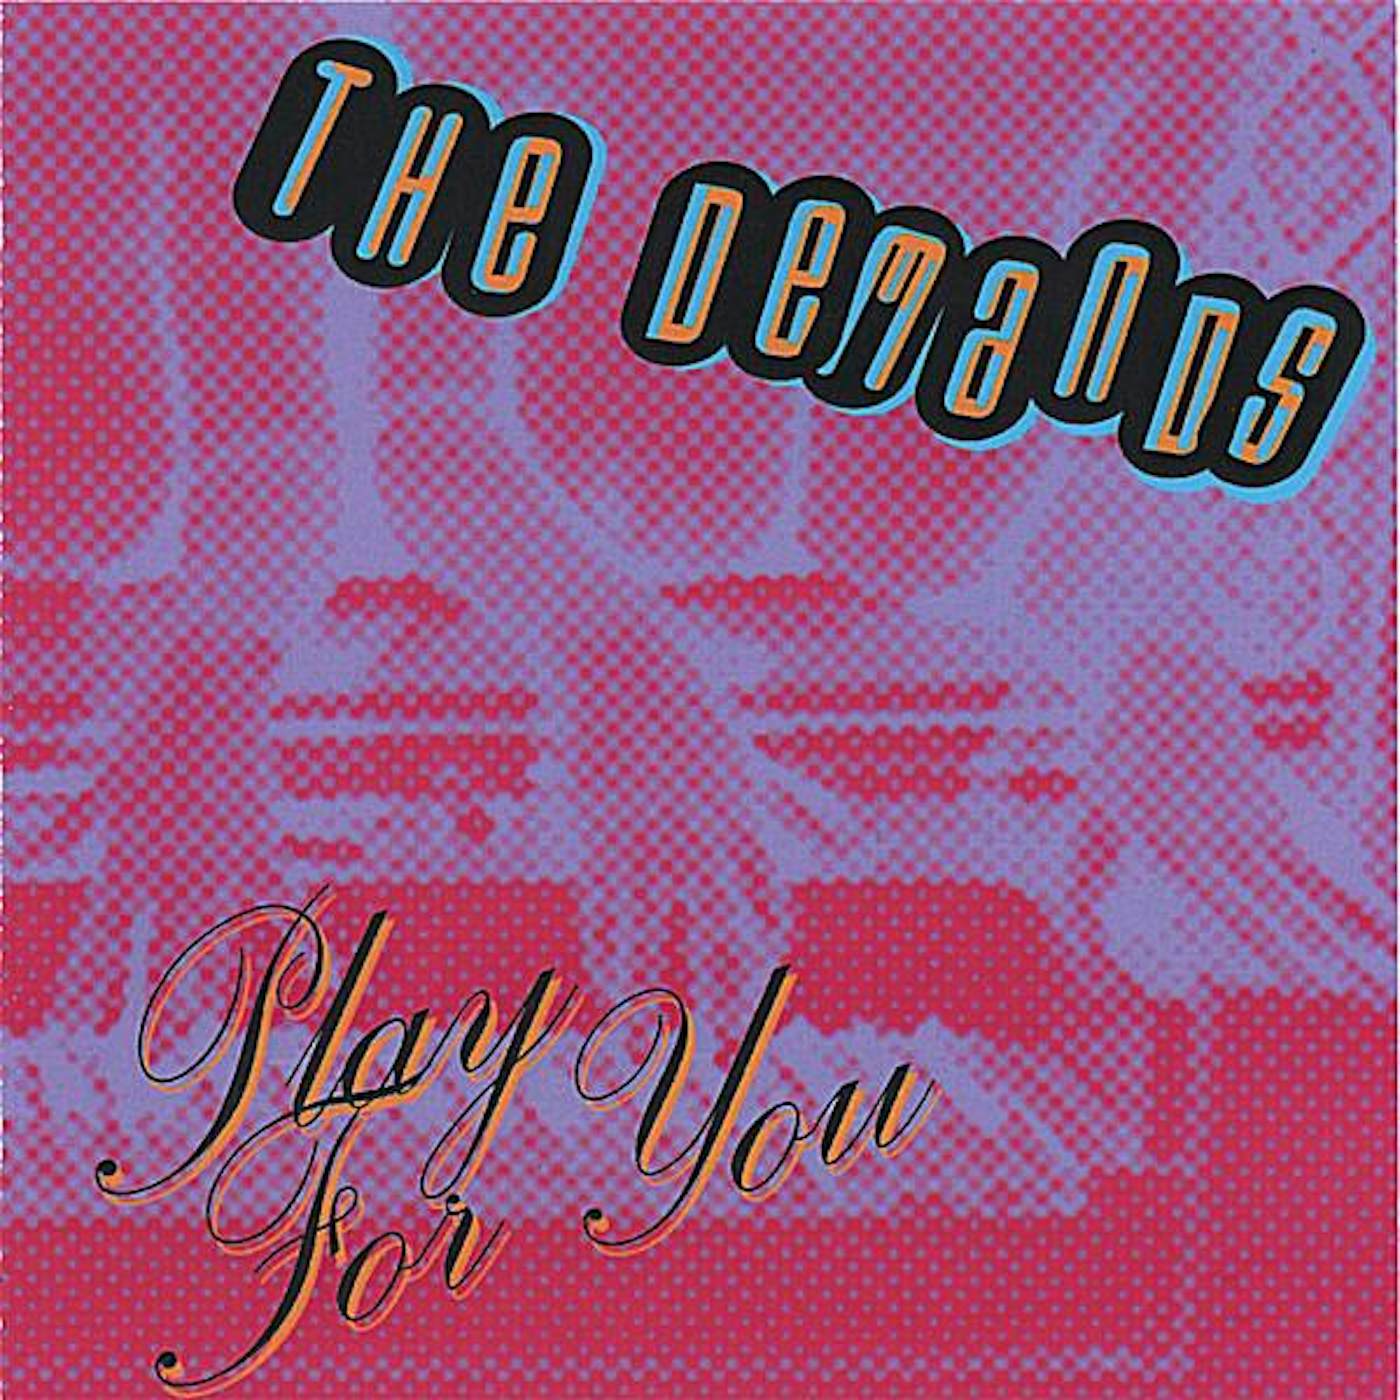 The Demands PLAY FOR YOU CD